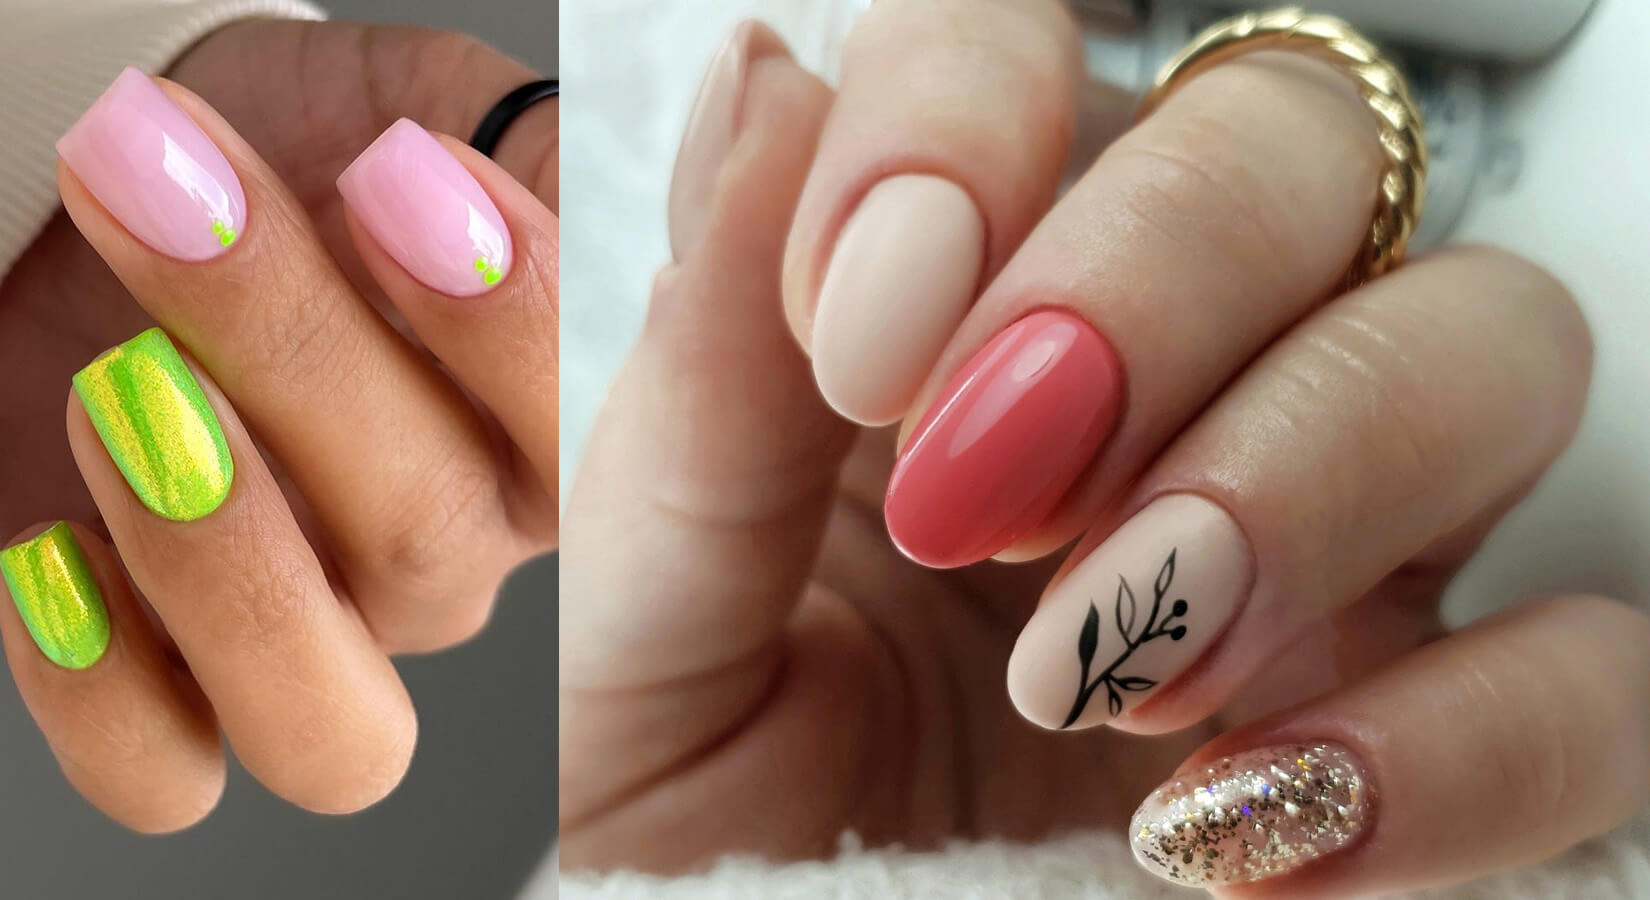 24 Short (But Chic) Coffin Nail Looks to Try